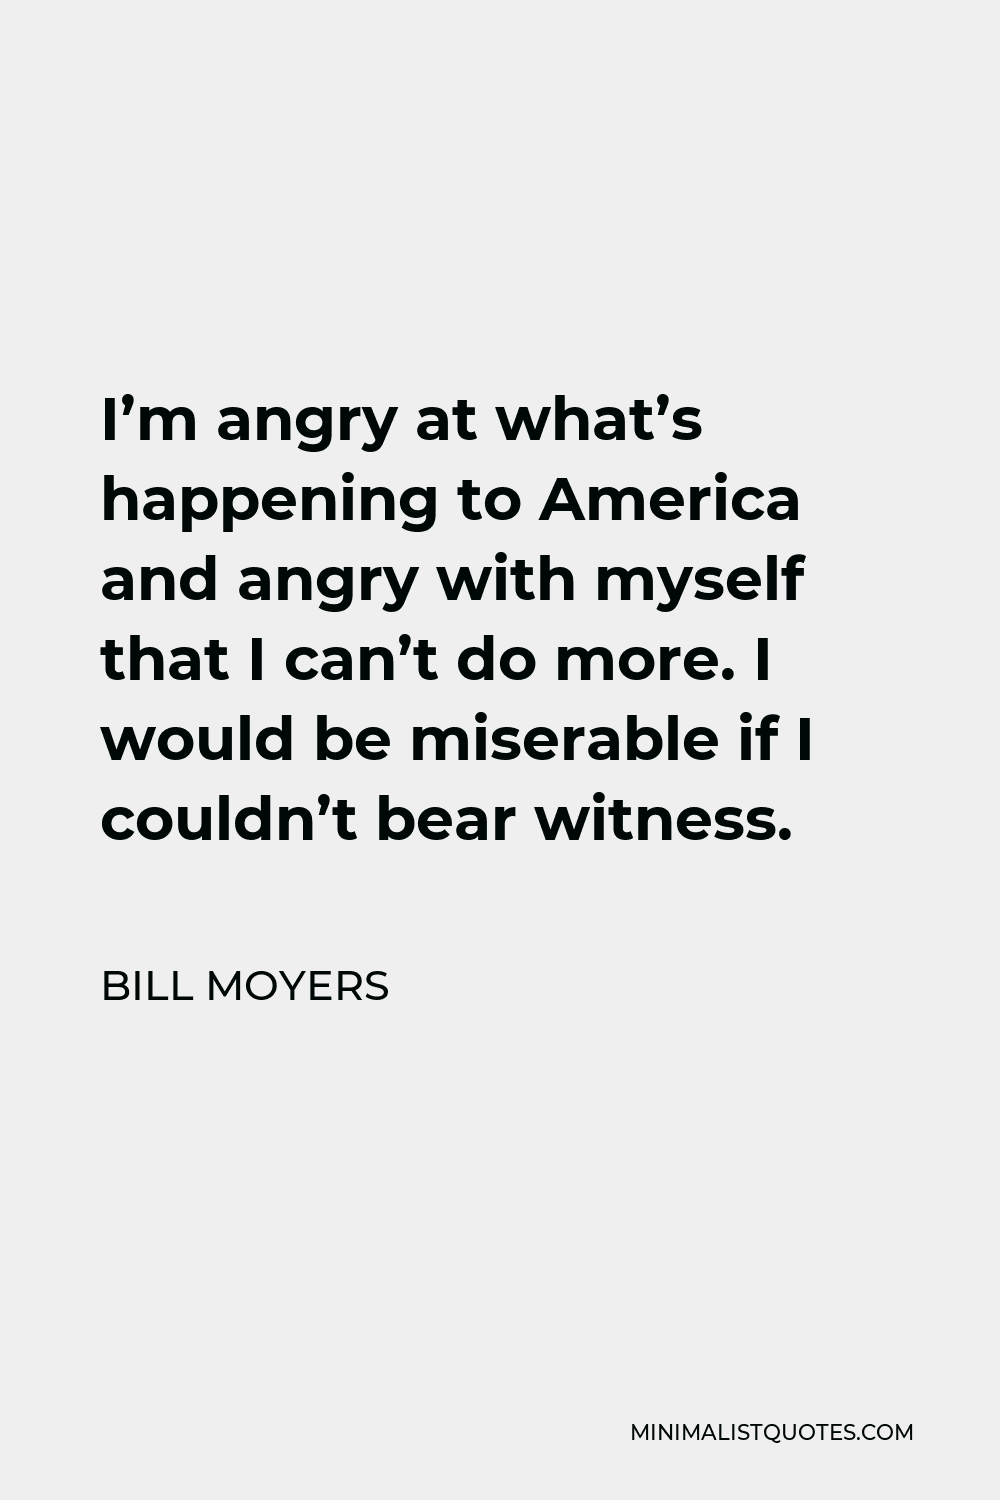 Bill Moyers Quote - I’m angry at what’s happening to America and angry with myself that I can’t do more. I would be miserable if I couldn’t bear witness.